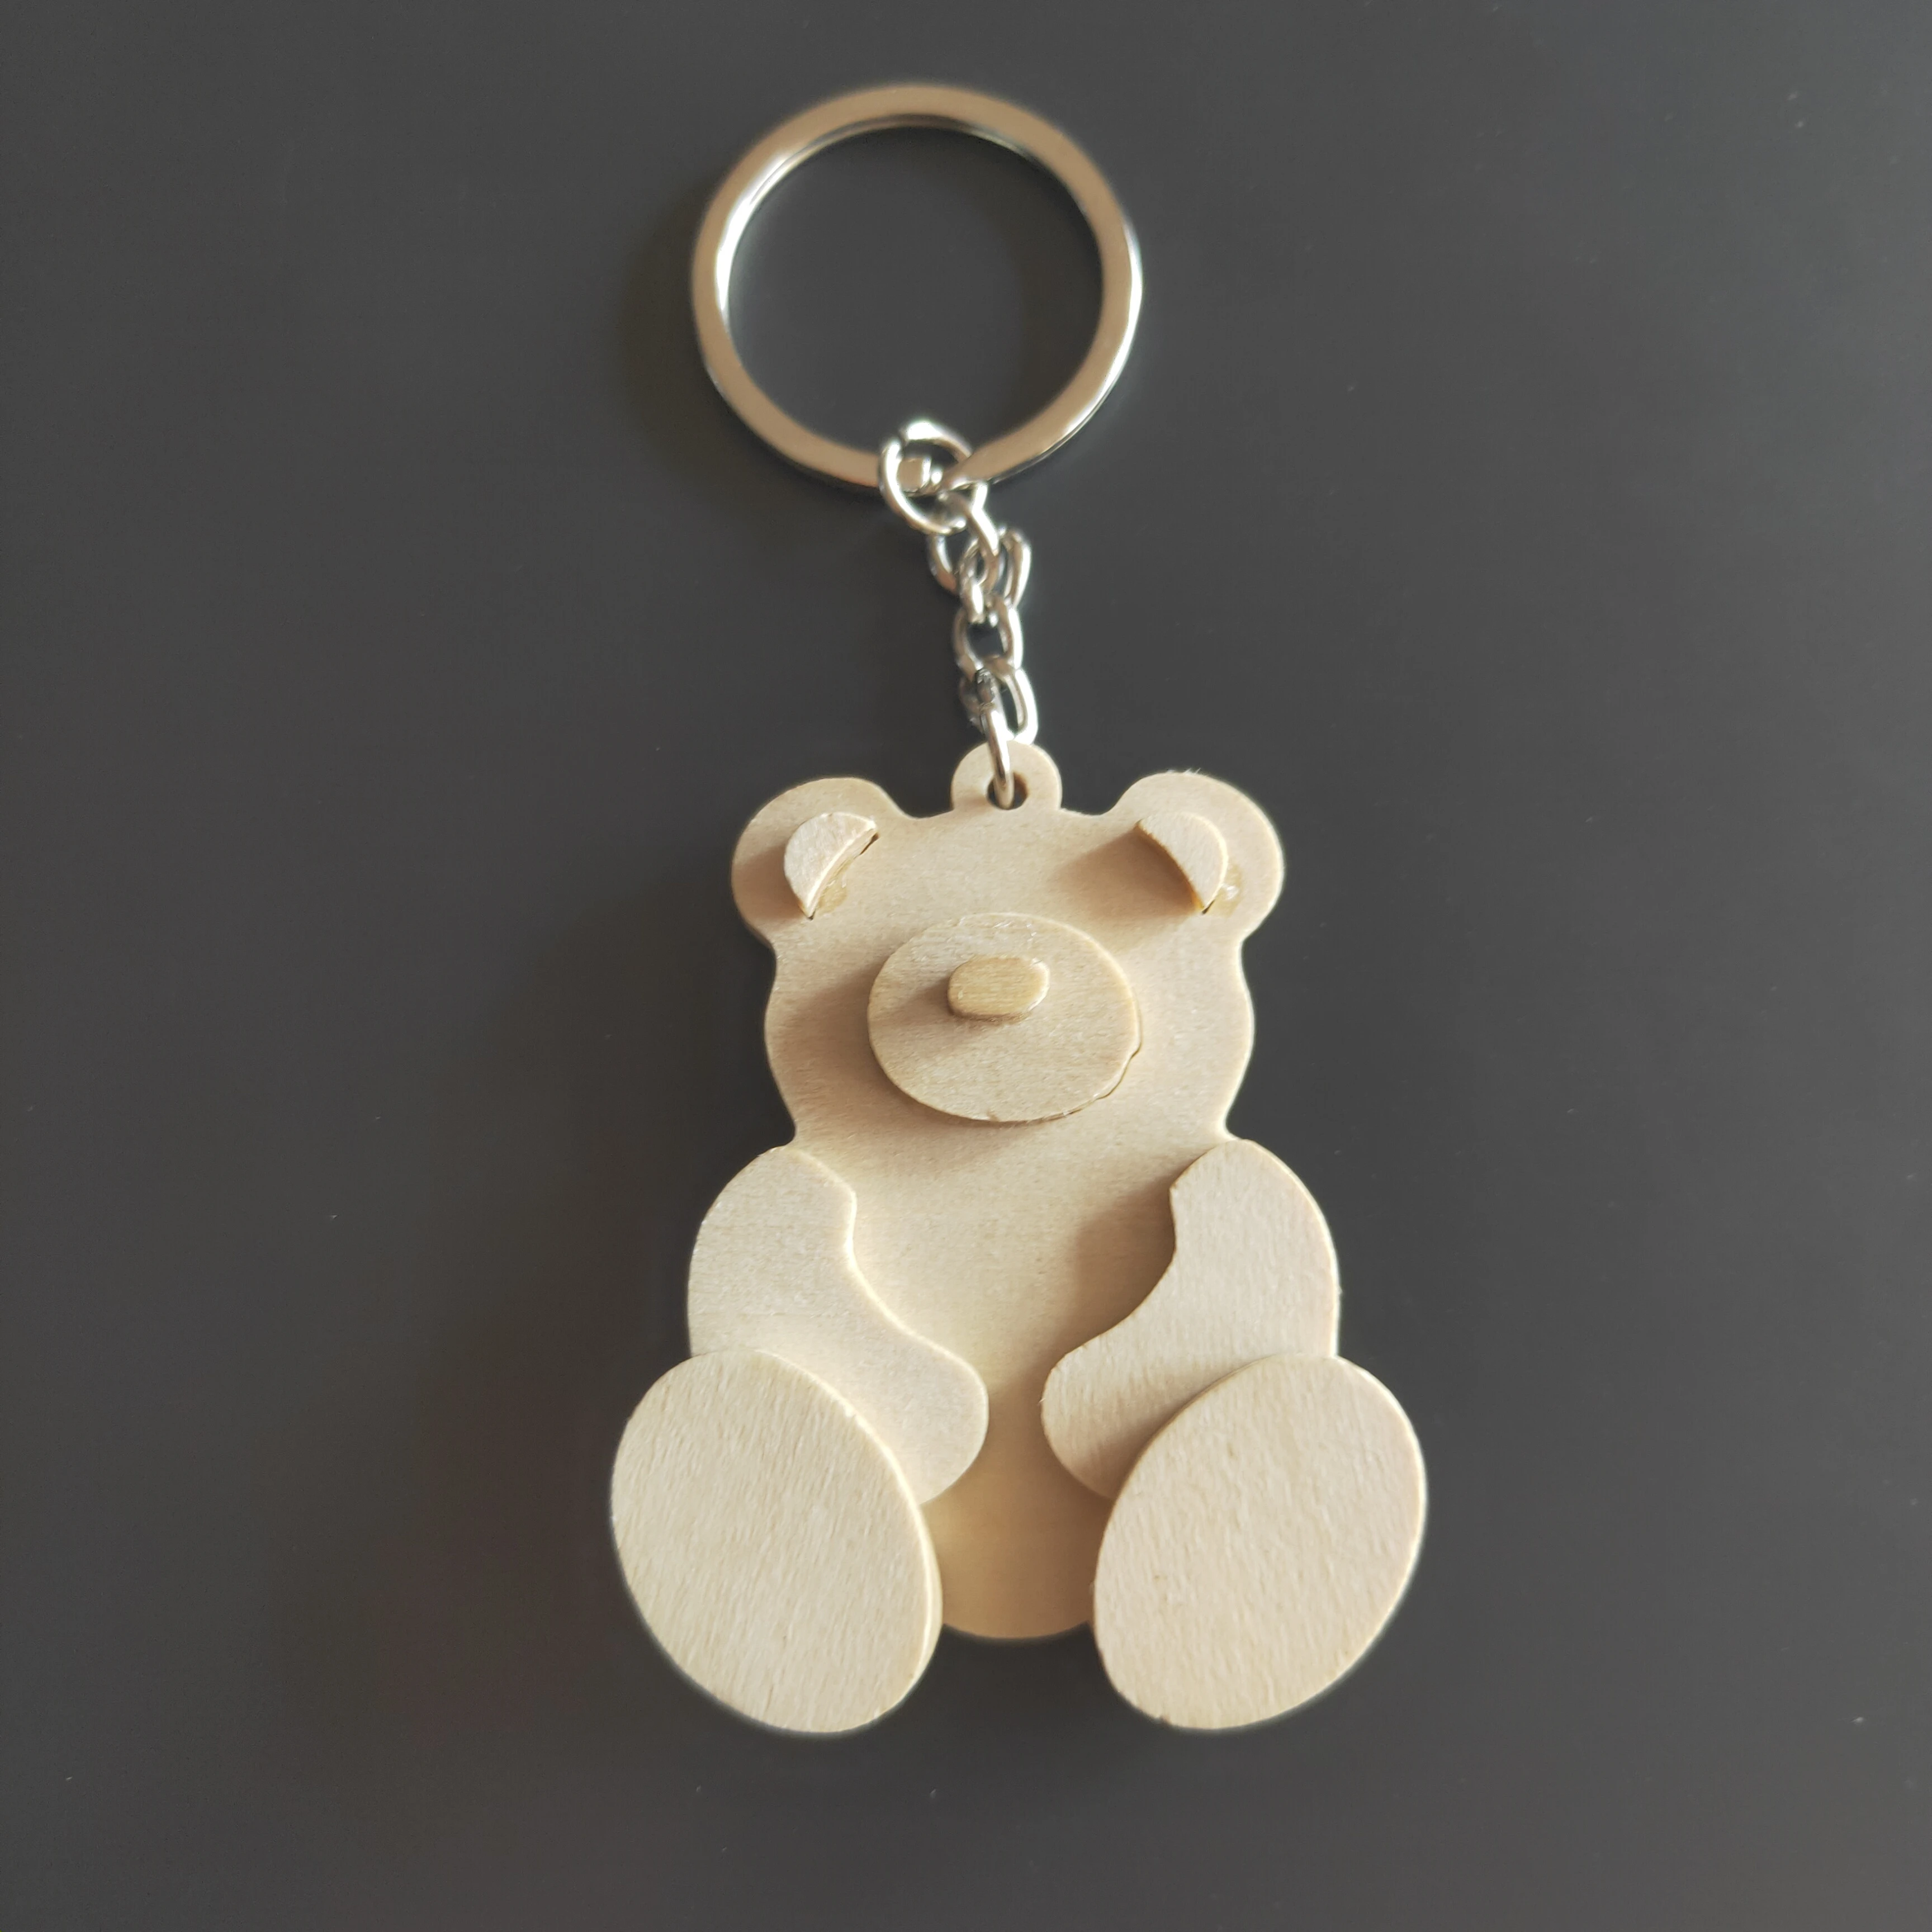 wooden key chain holder ring bear shape 3D keychain wood ring circle crafts